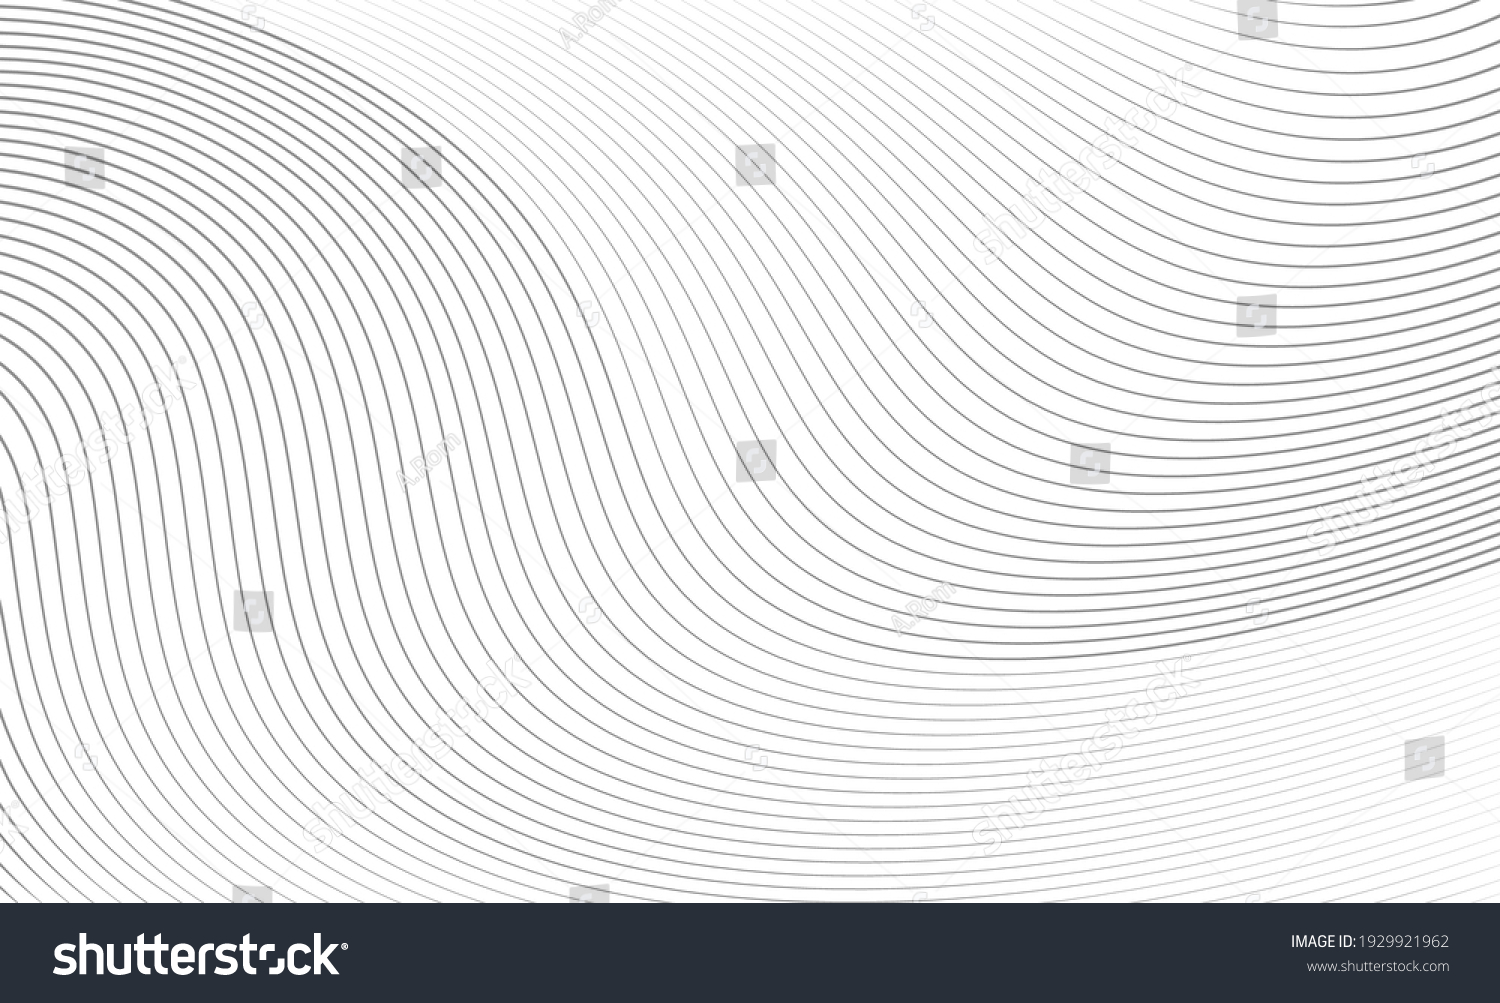 Vector Illustration of the gray pattern of lines abstract background. EPS10. #1929921962